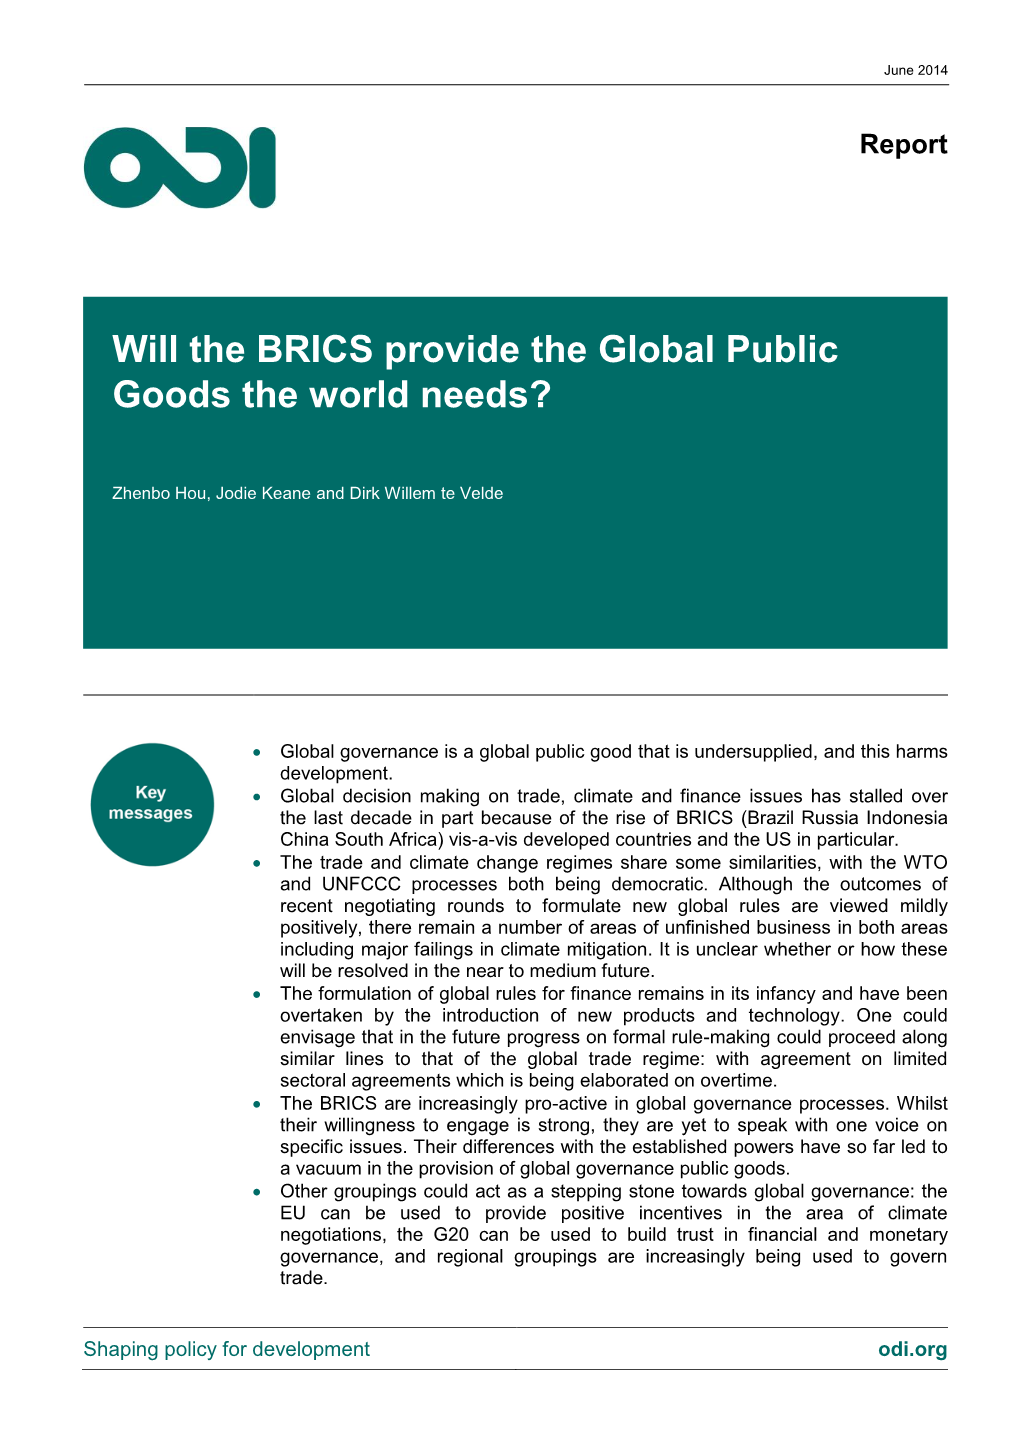 Will the BRICS Provide the Global Public Goods the World Needs?